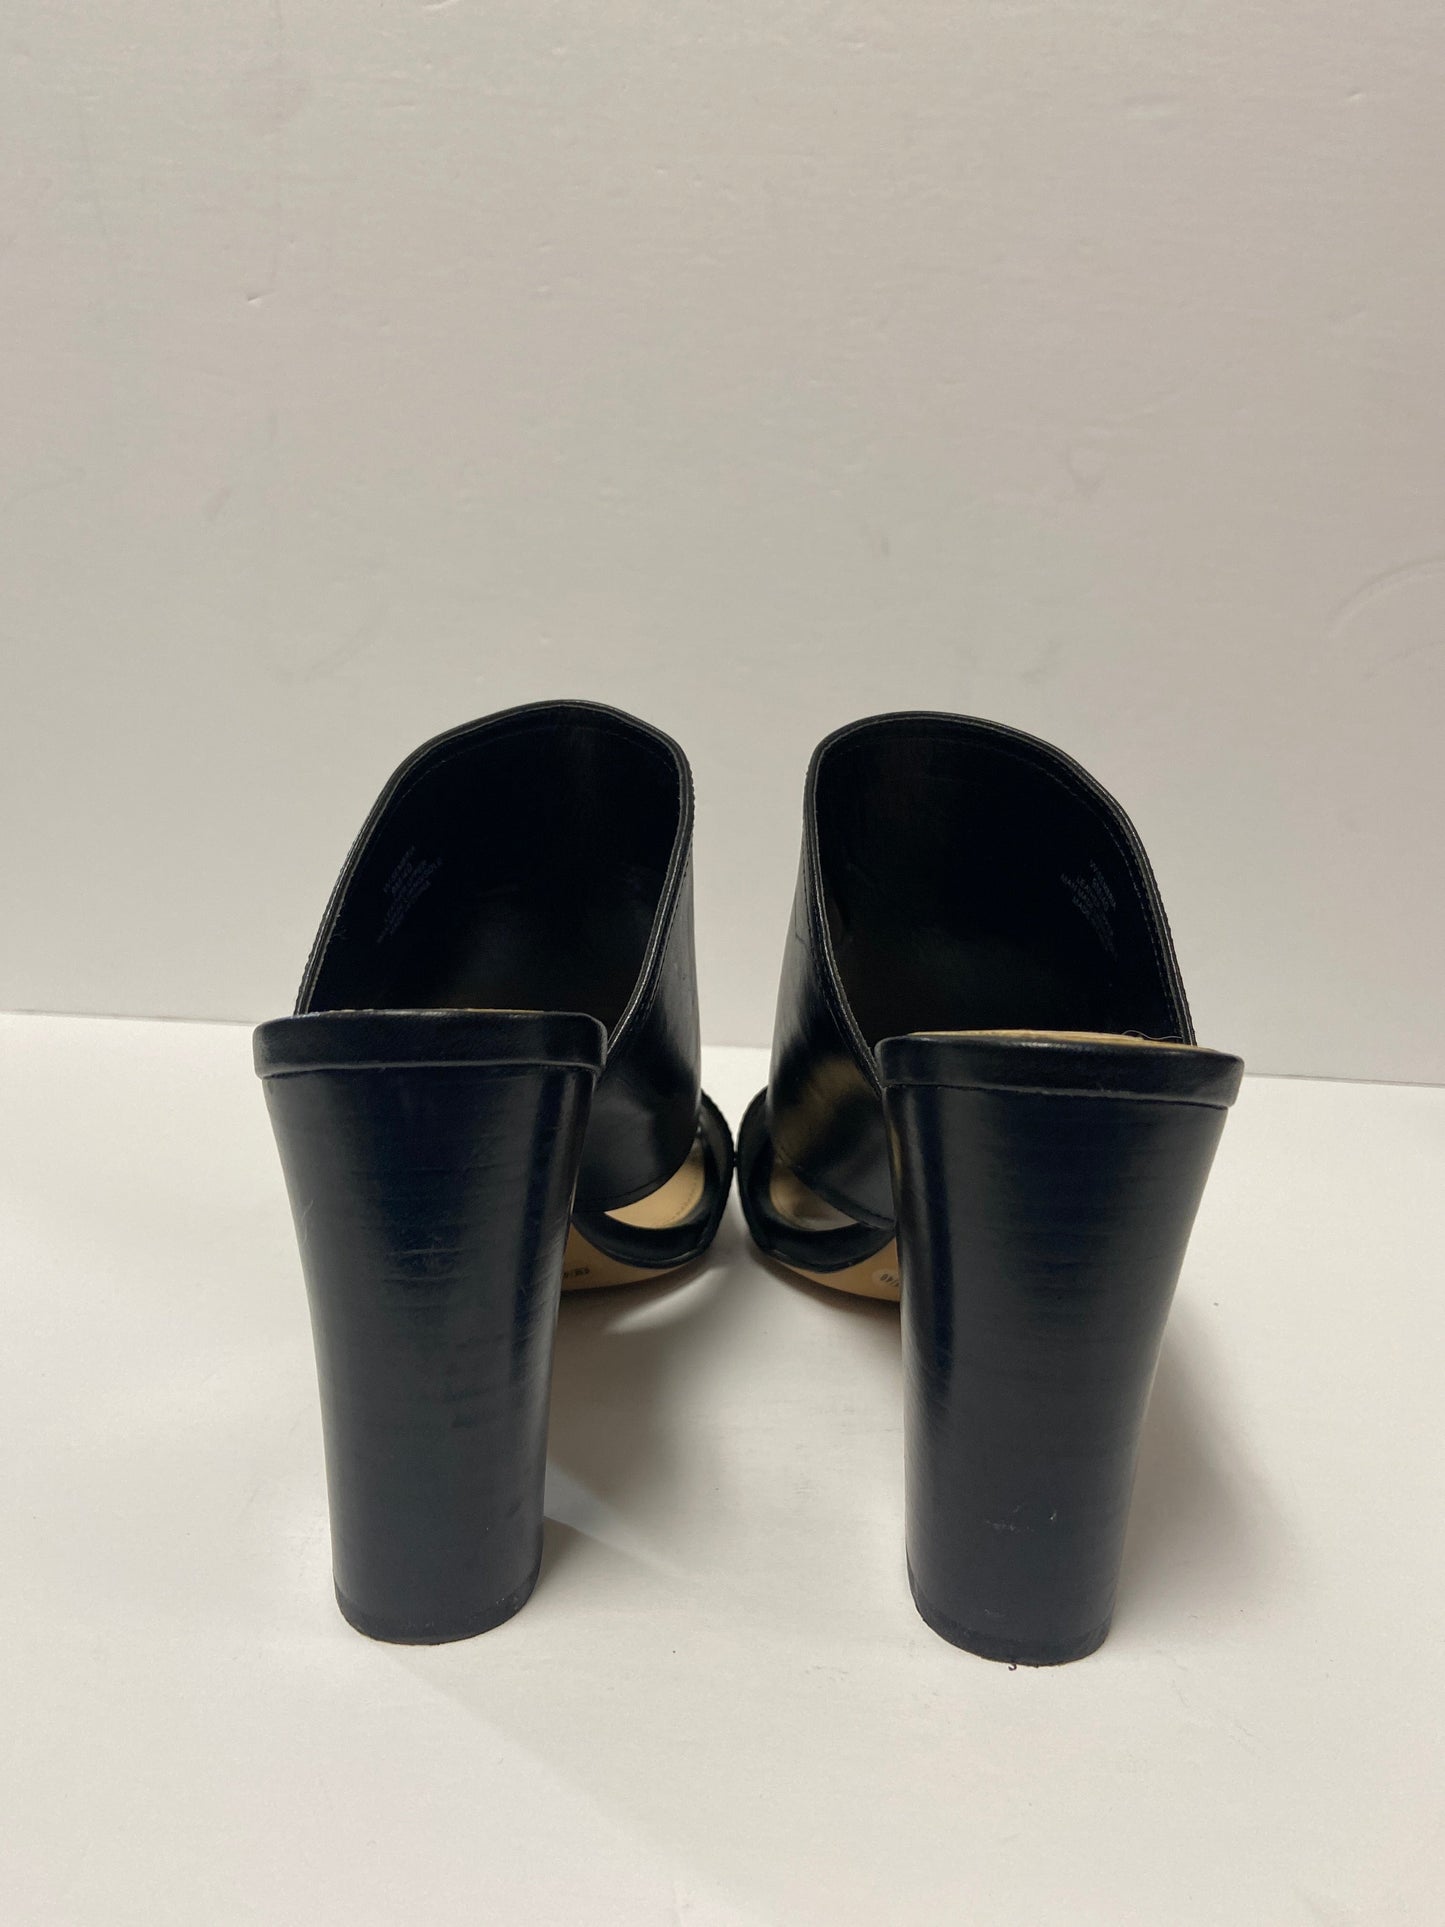 Sandals Heels Block By Vince Camuto  Size: 9